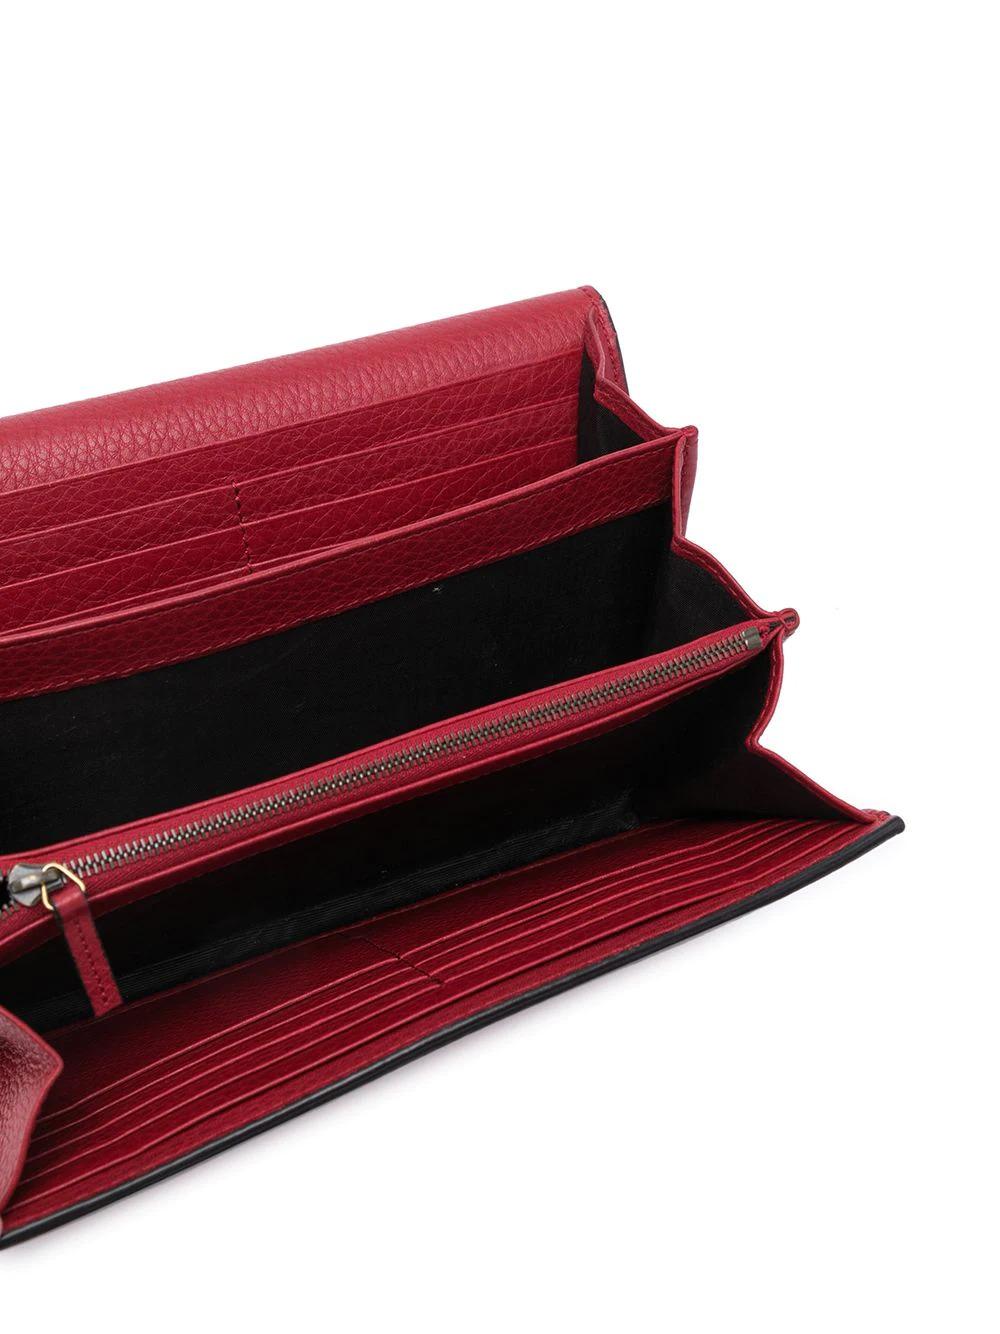 This Gucci Marmonet Wallet comes with a removable shoulder chain, and an extensive interior space for all everyday necessitites. The perfect addition to your on-the-go outfit!

Colour: Red

Composition: Leather, Brass

Measurements: Depth 5 cm,